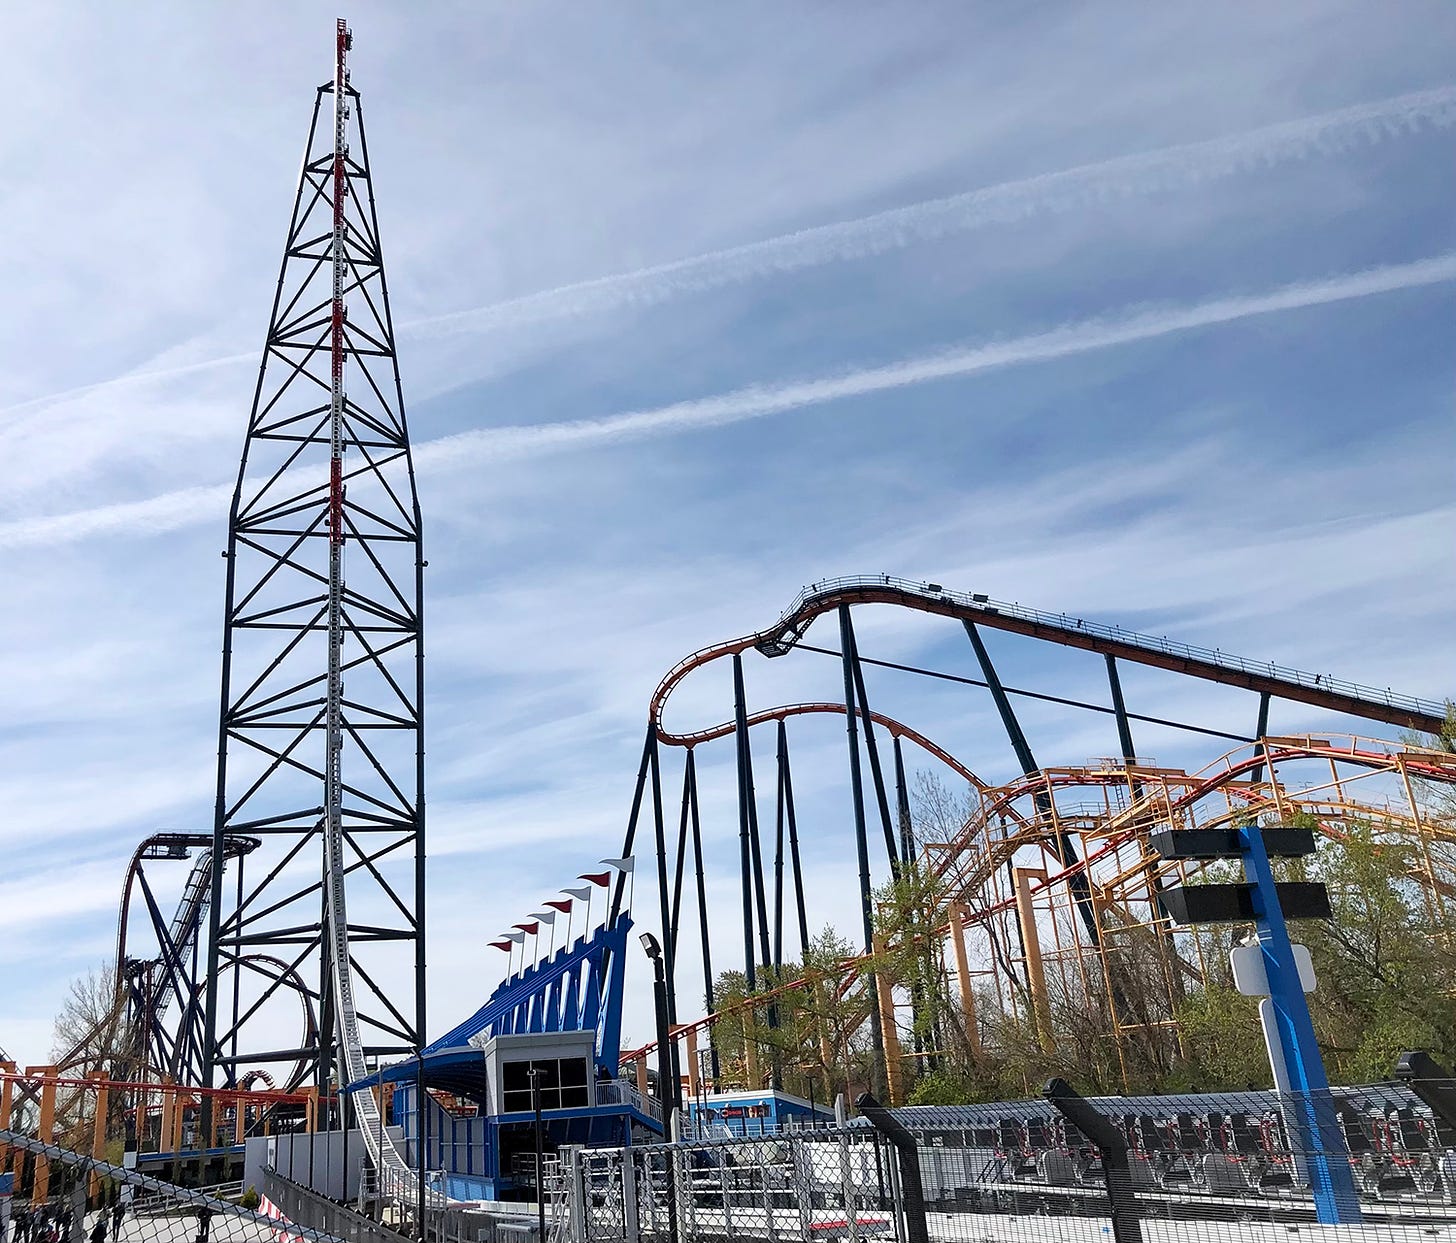 Top Thrill 2 reverse spike